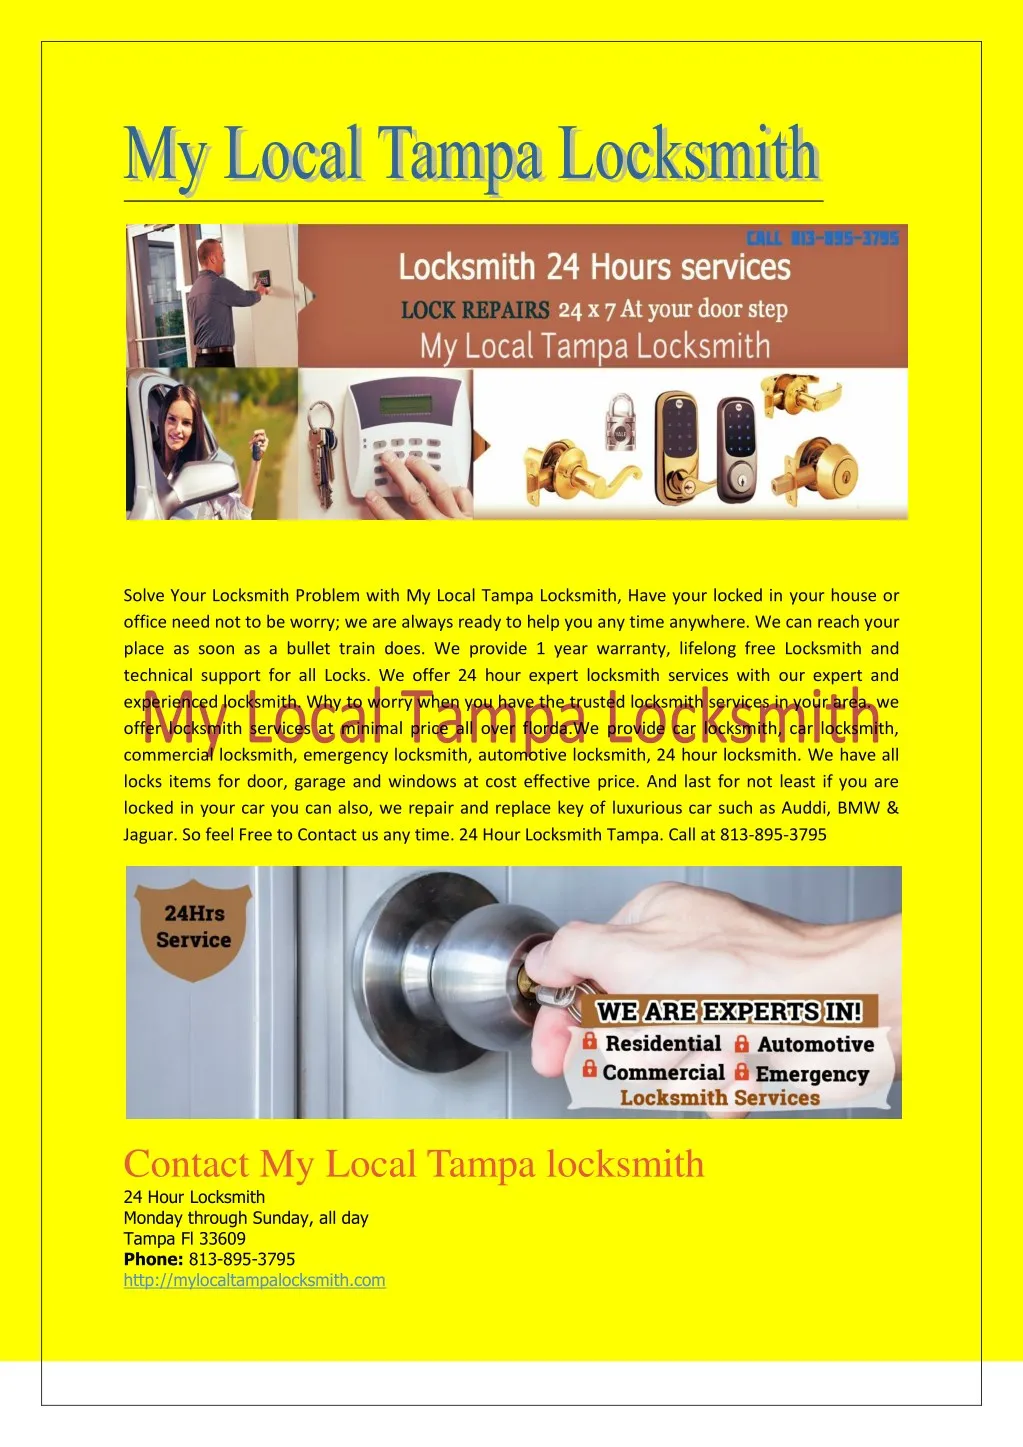 solve your locksmith problem with my local tampa